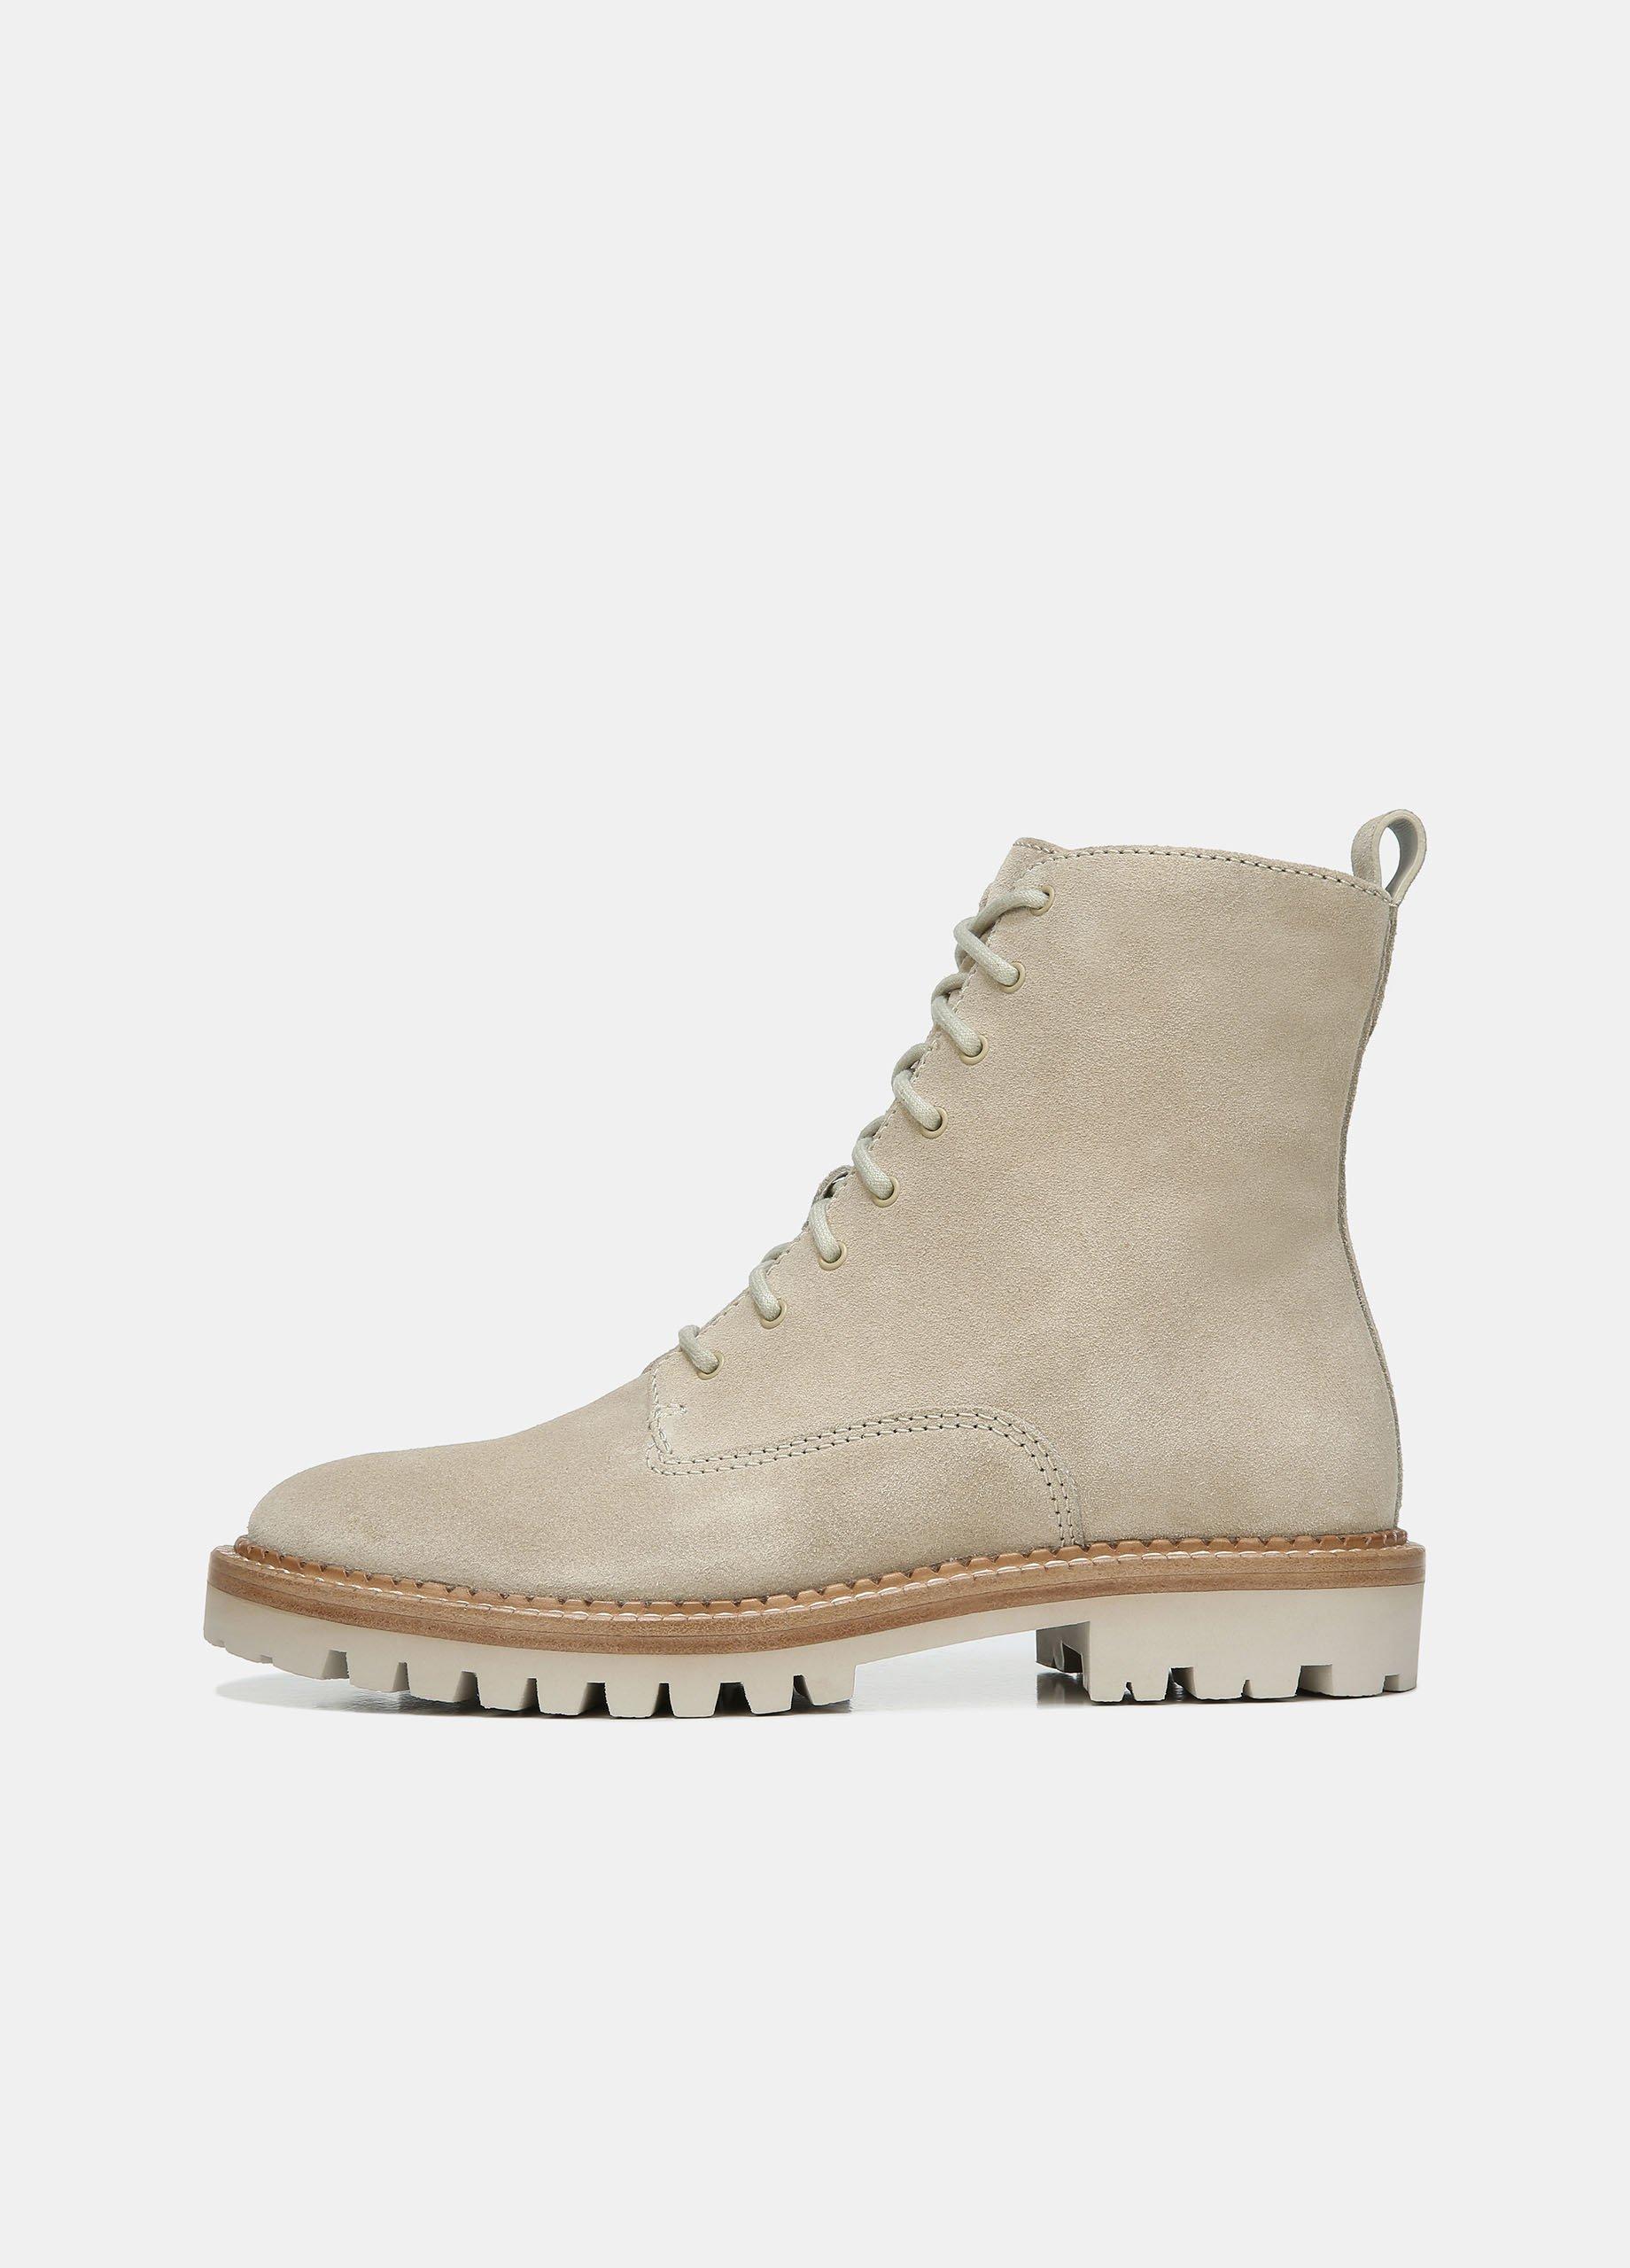 Suede Cabria Lug Boot for Women | Vince